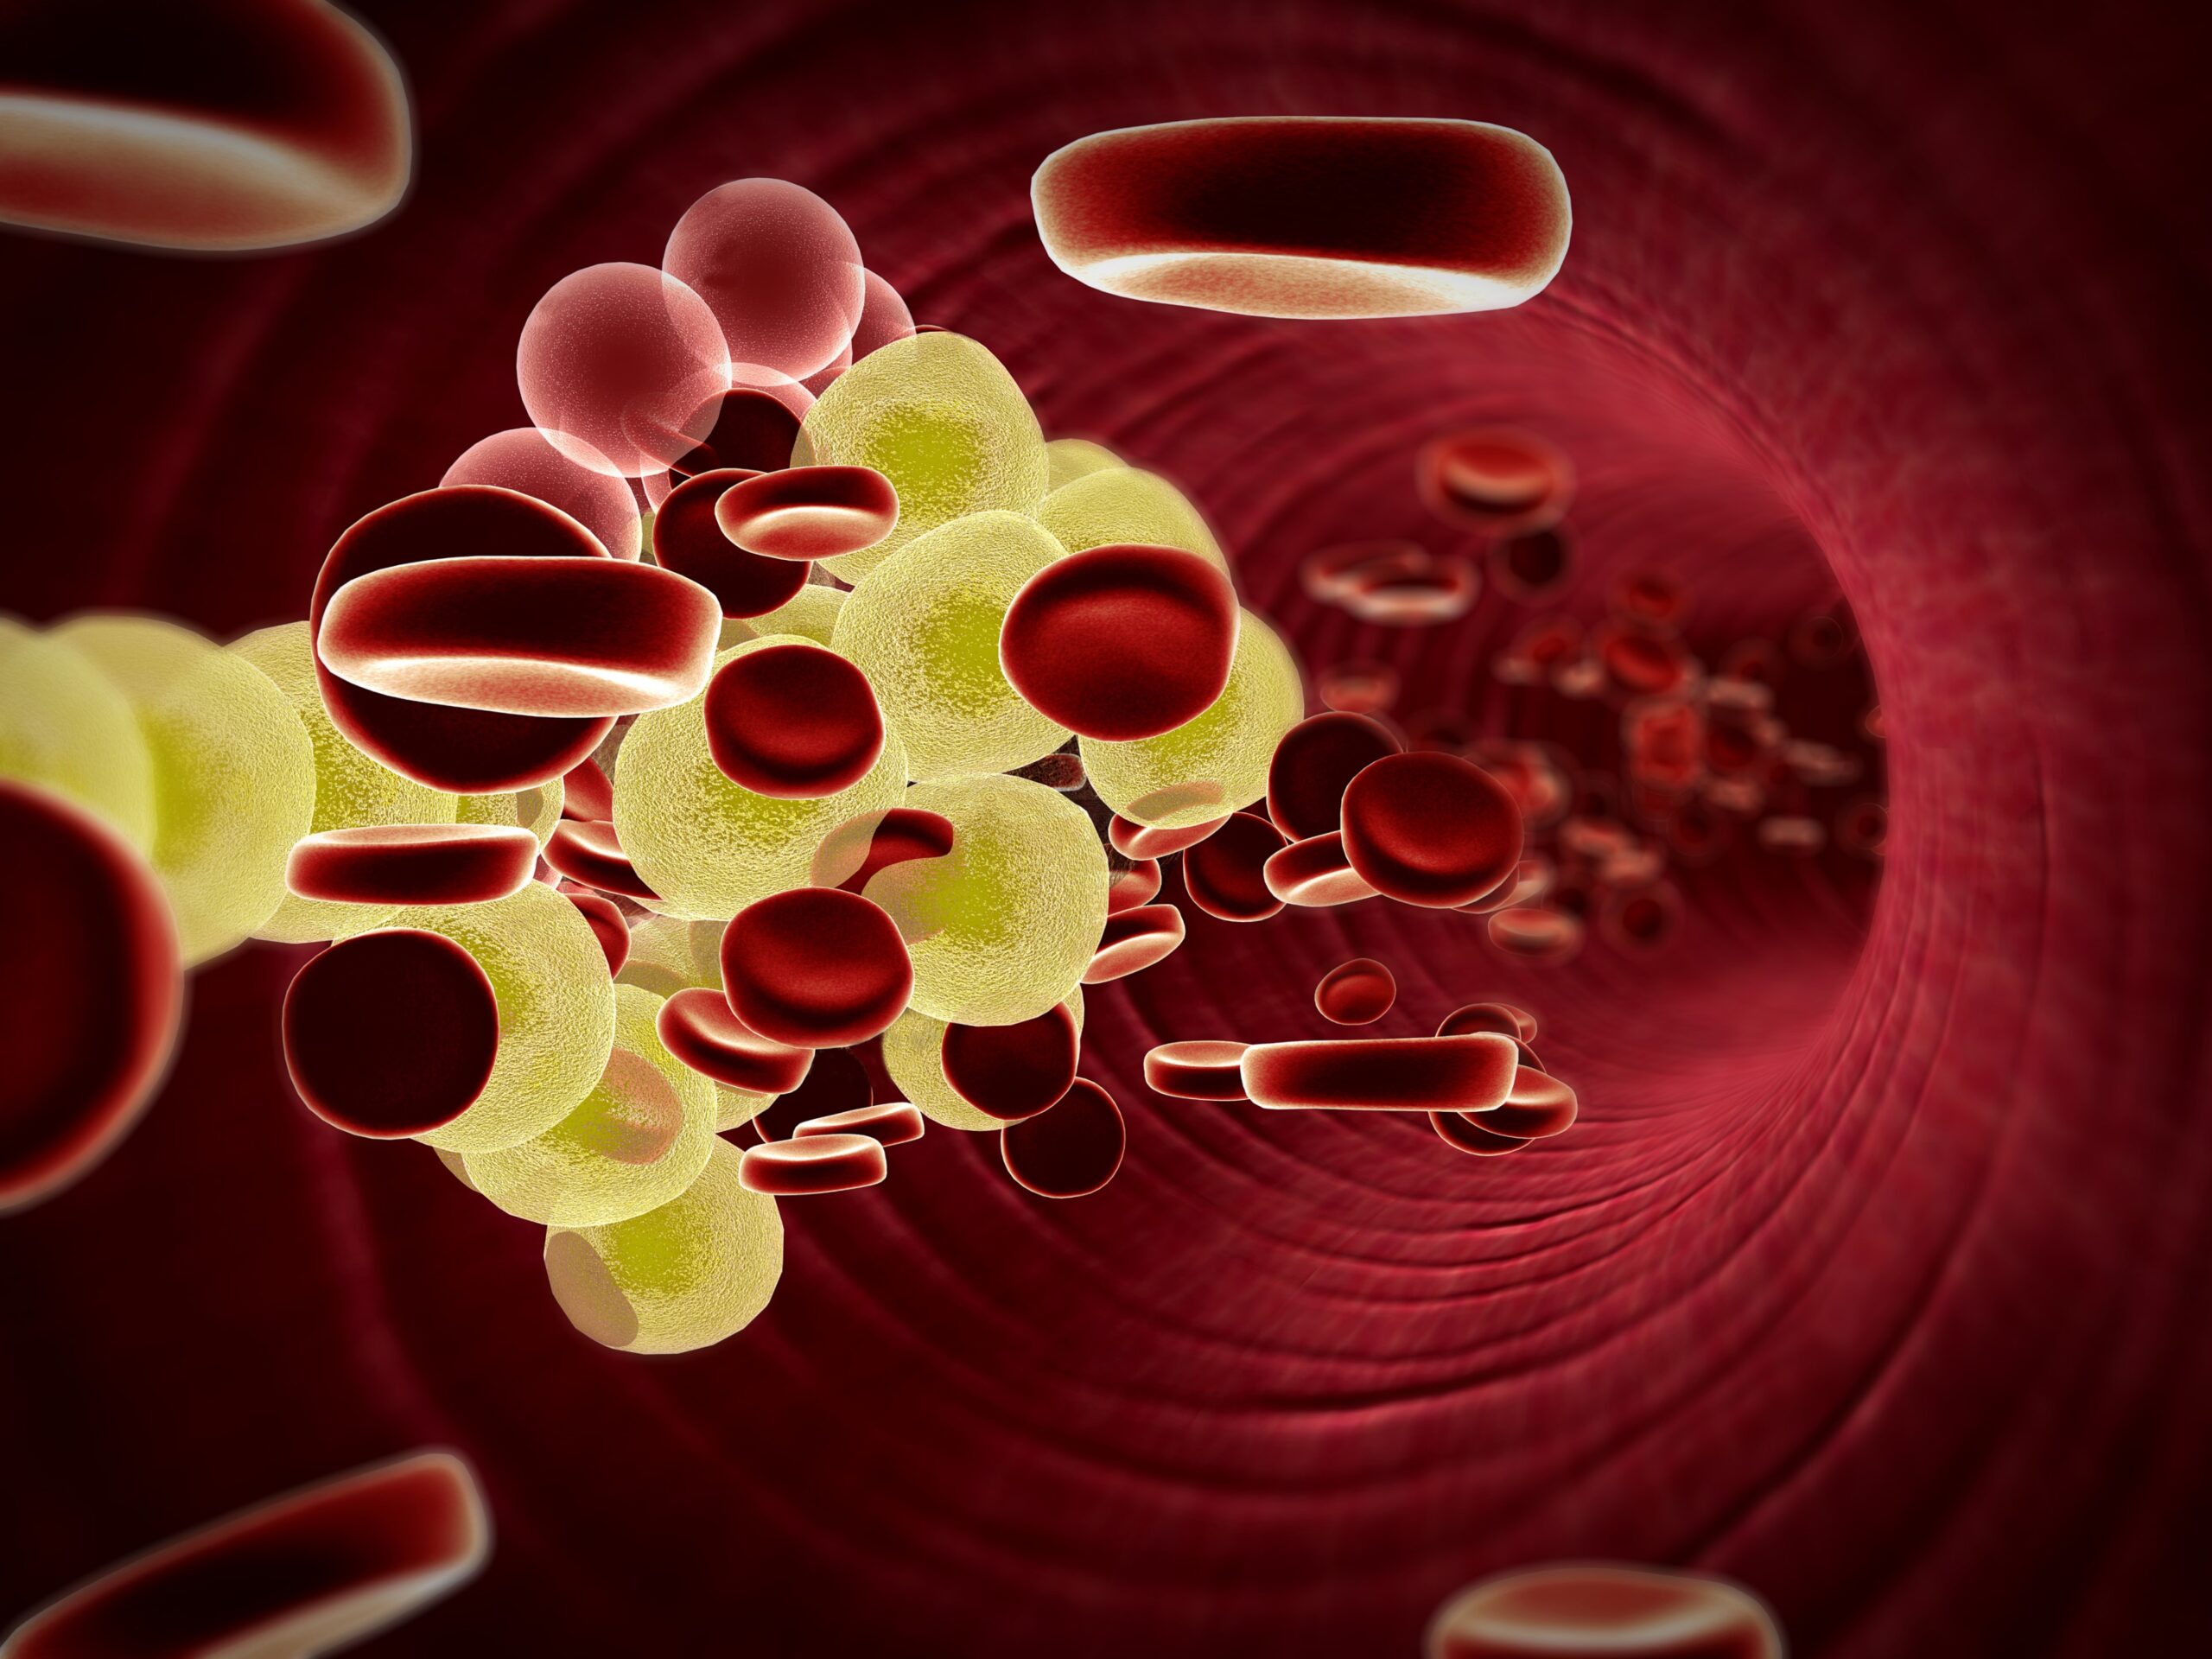 Protein that blocks the body's ability to clear bad cholesterol identified